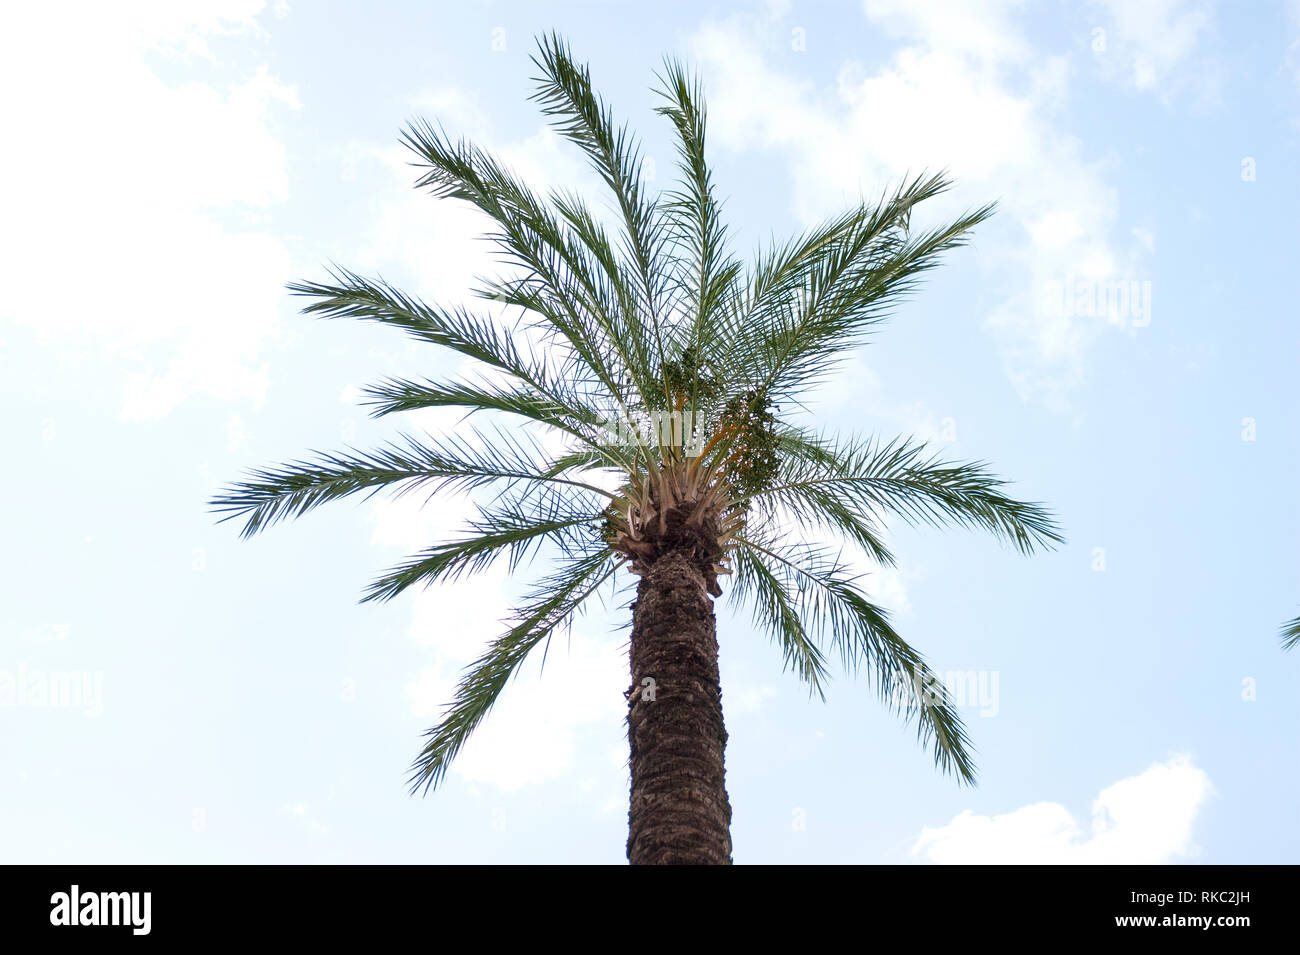 Palm tree on a blue and cloudy sky. Stock Photo